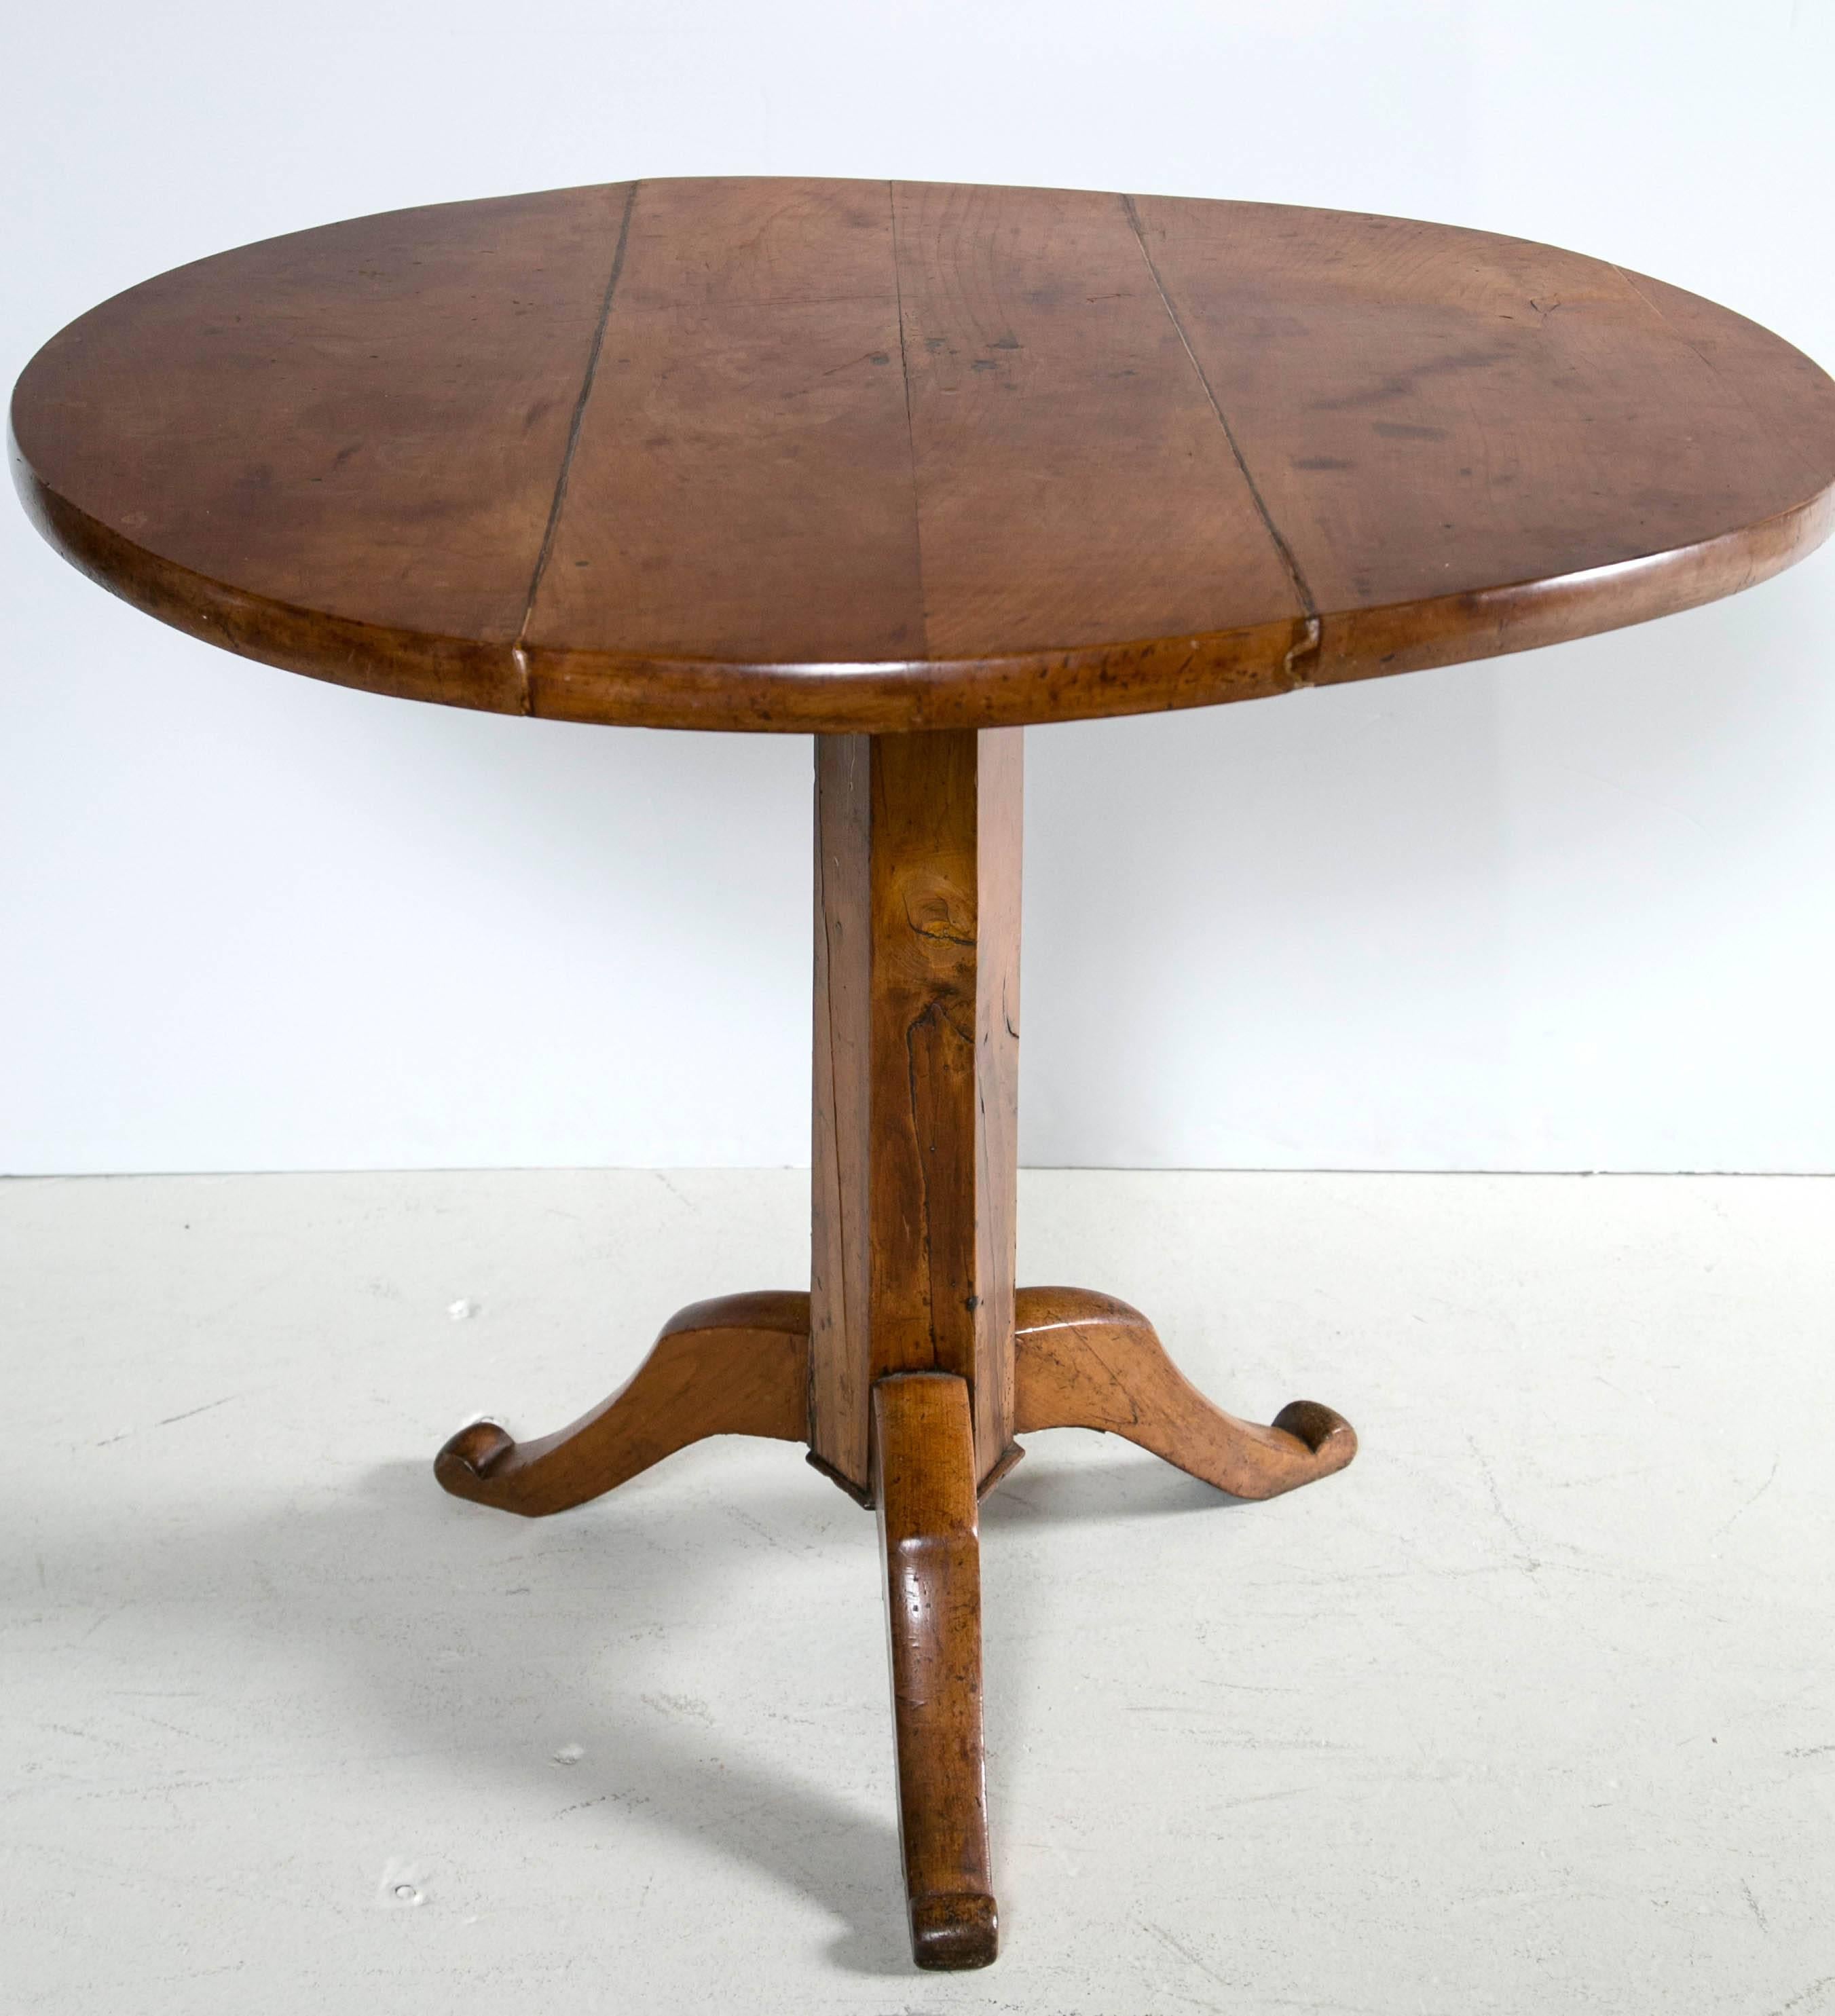 Early 19th century cherry table.